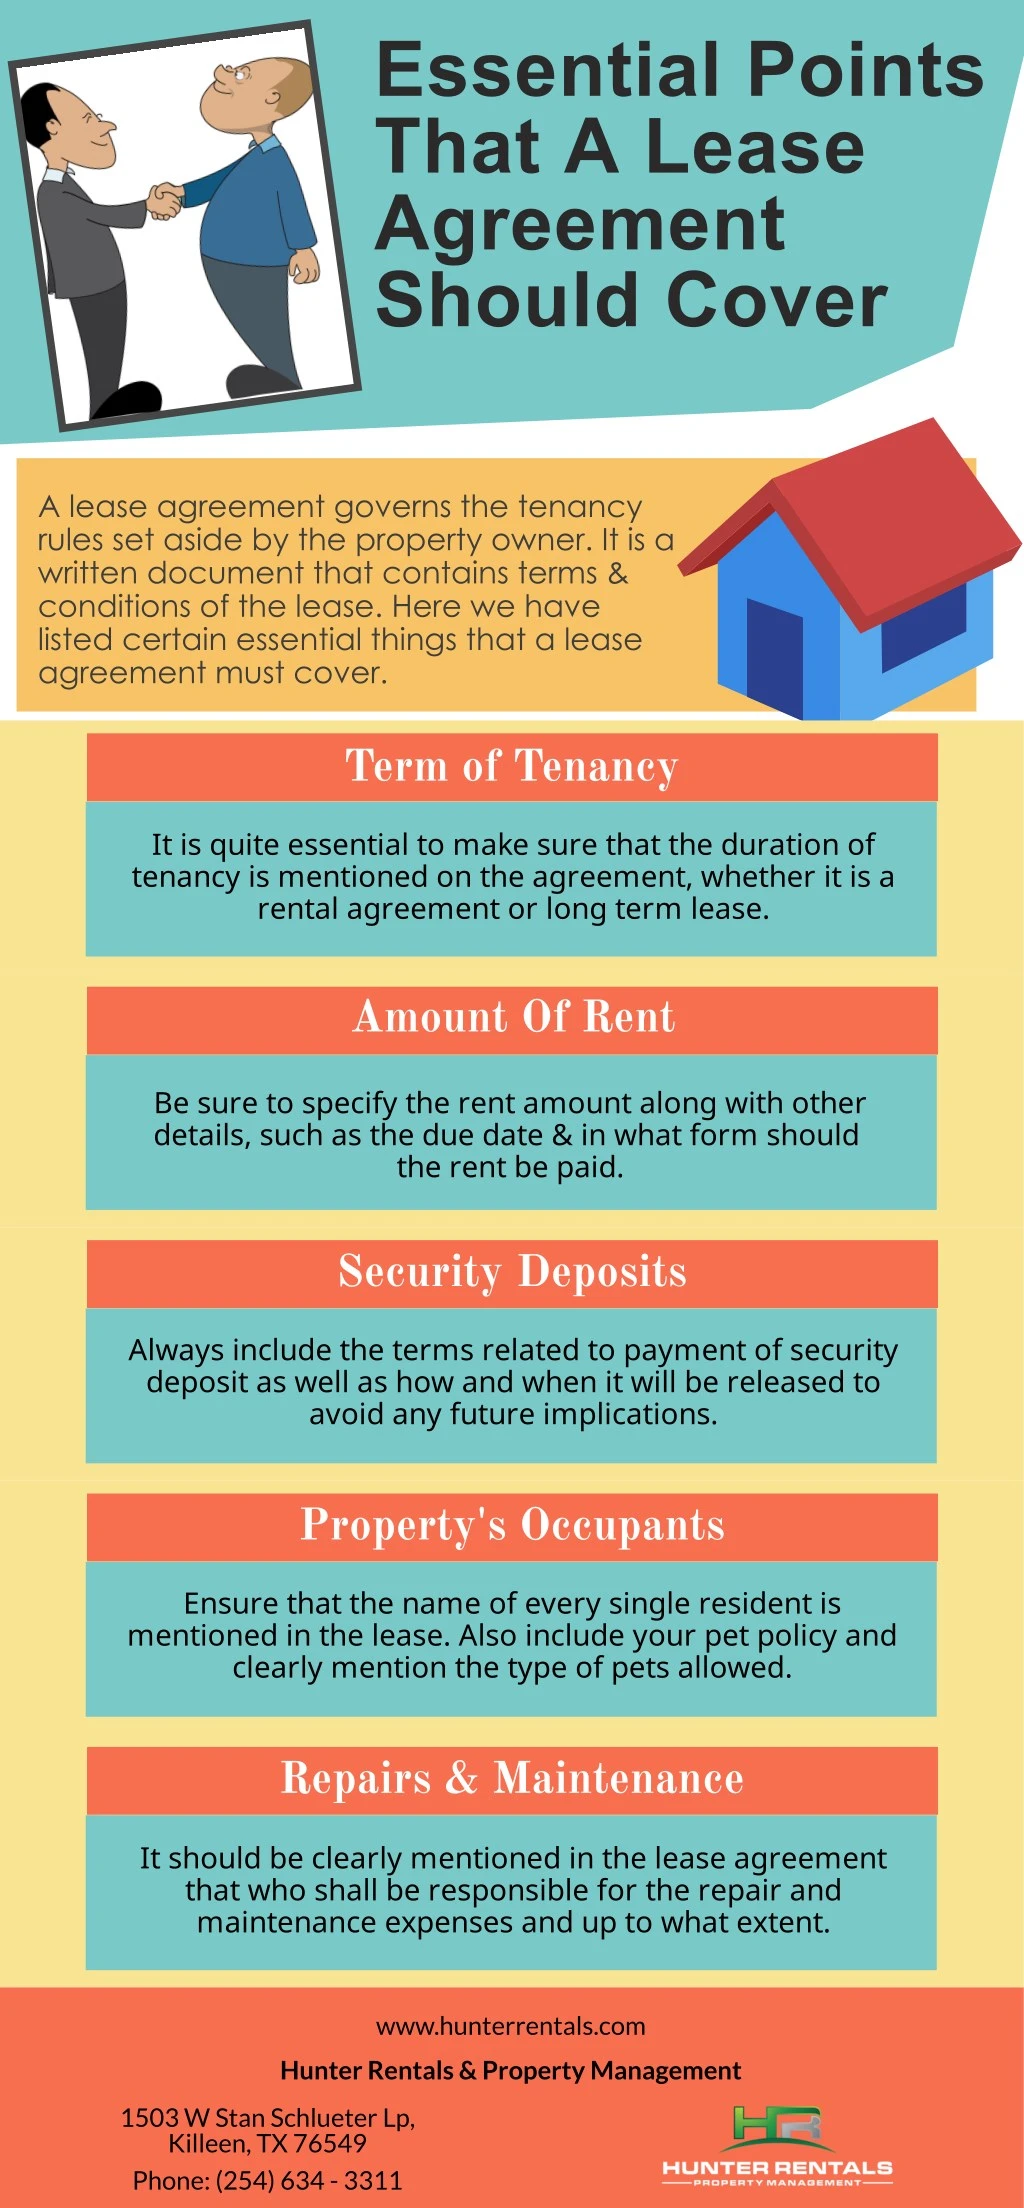 essential points that a lease agreement should